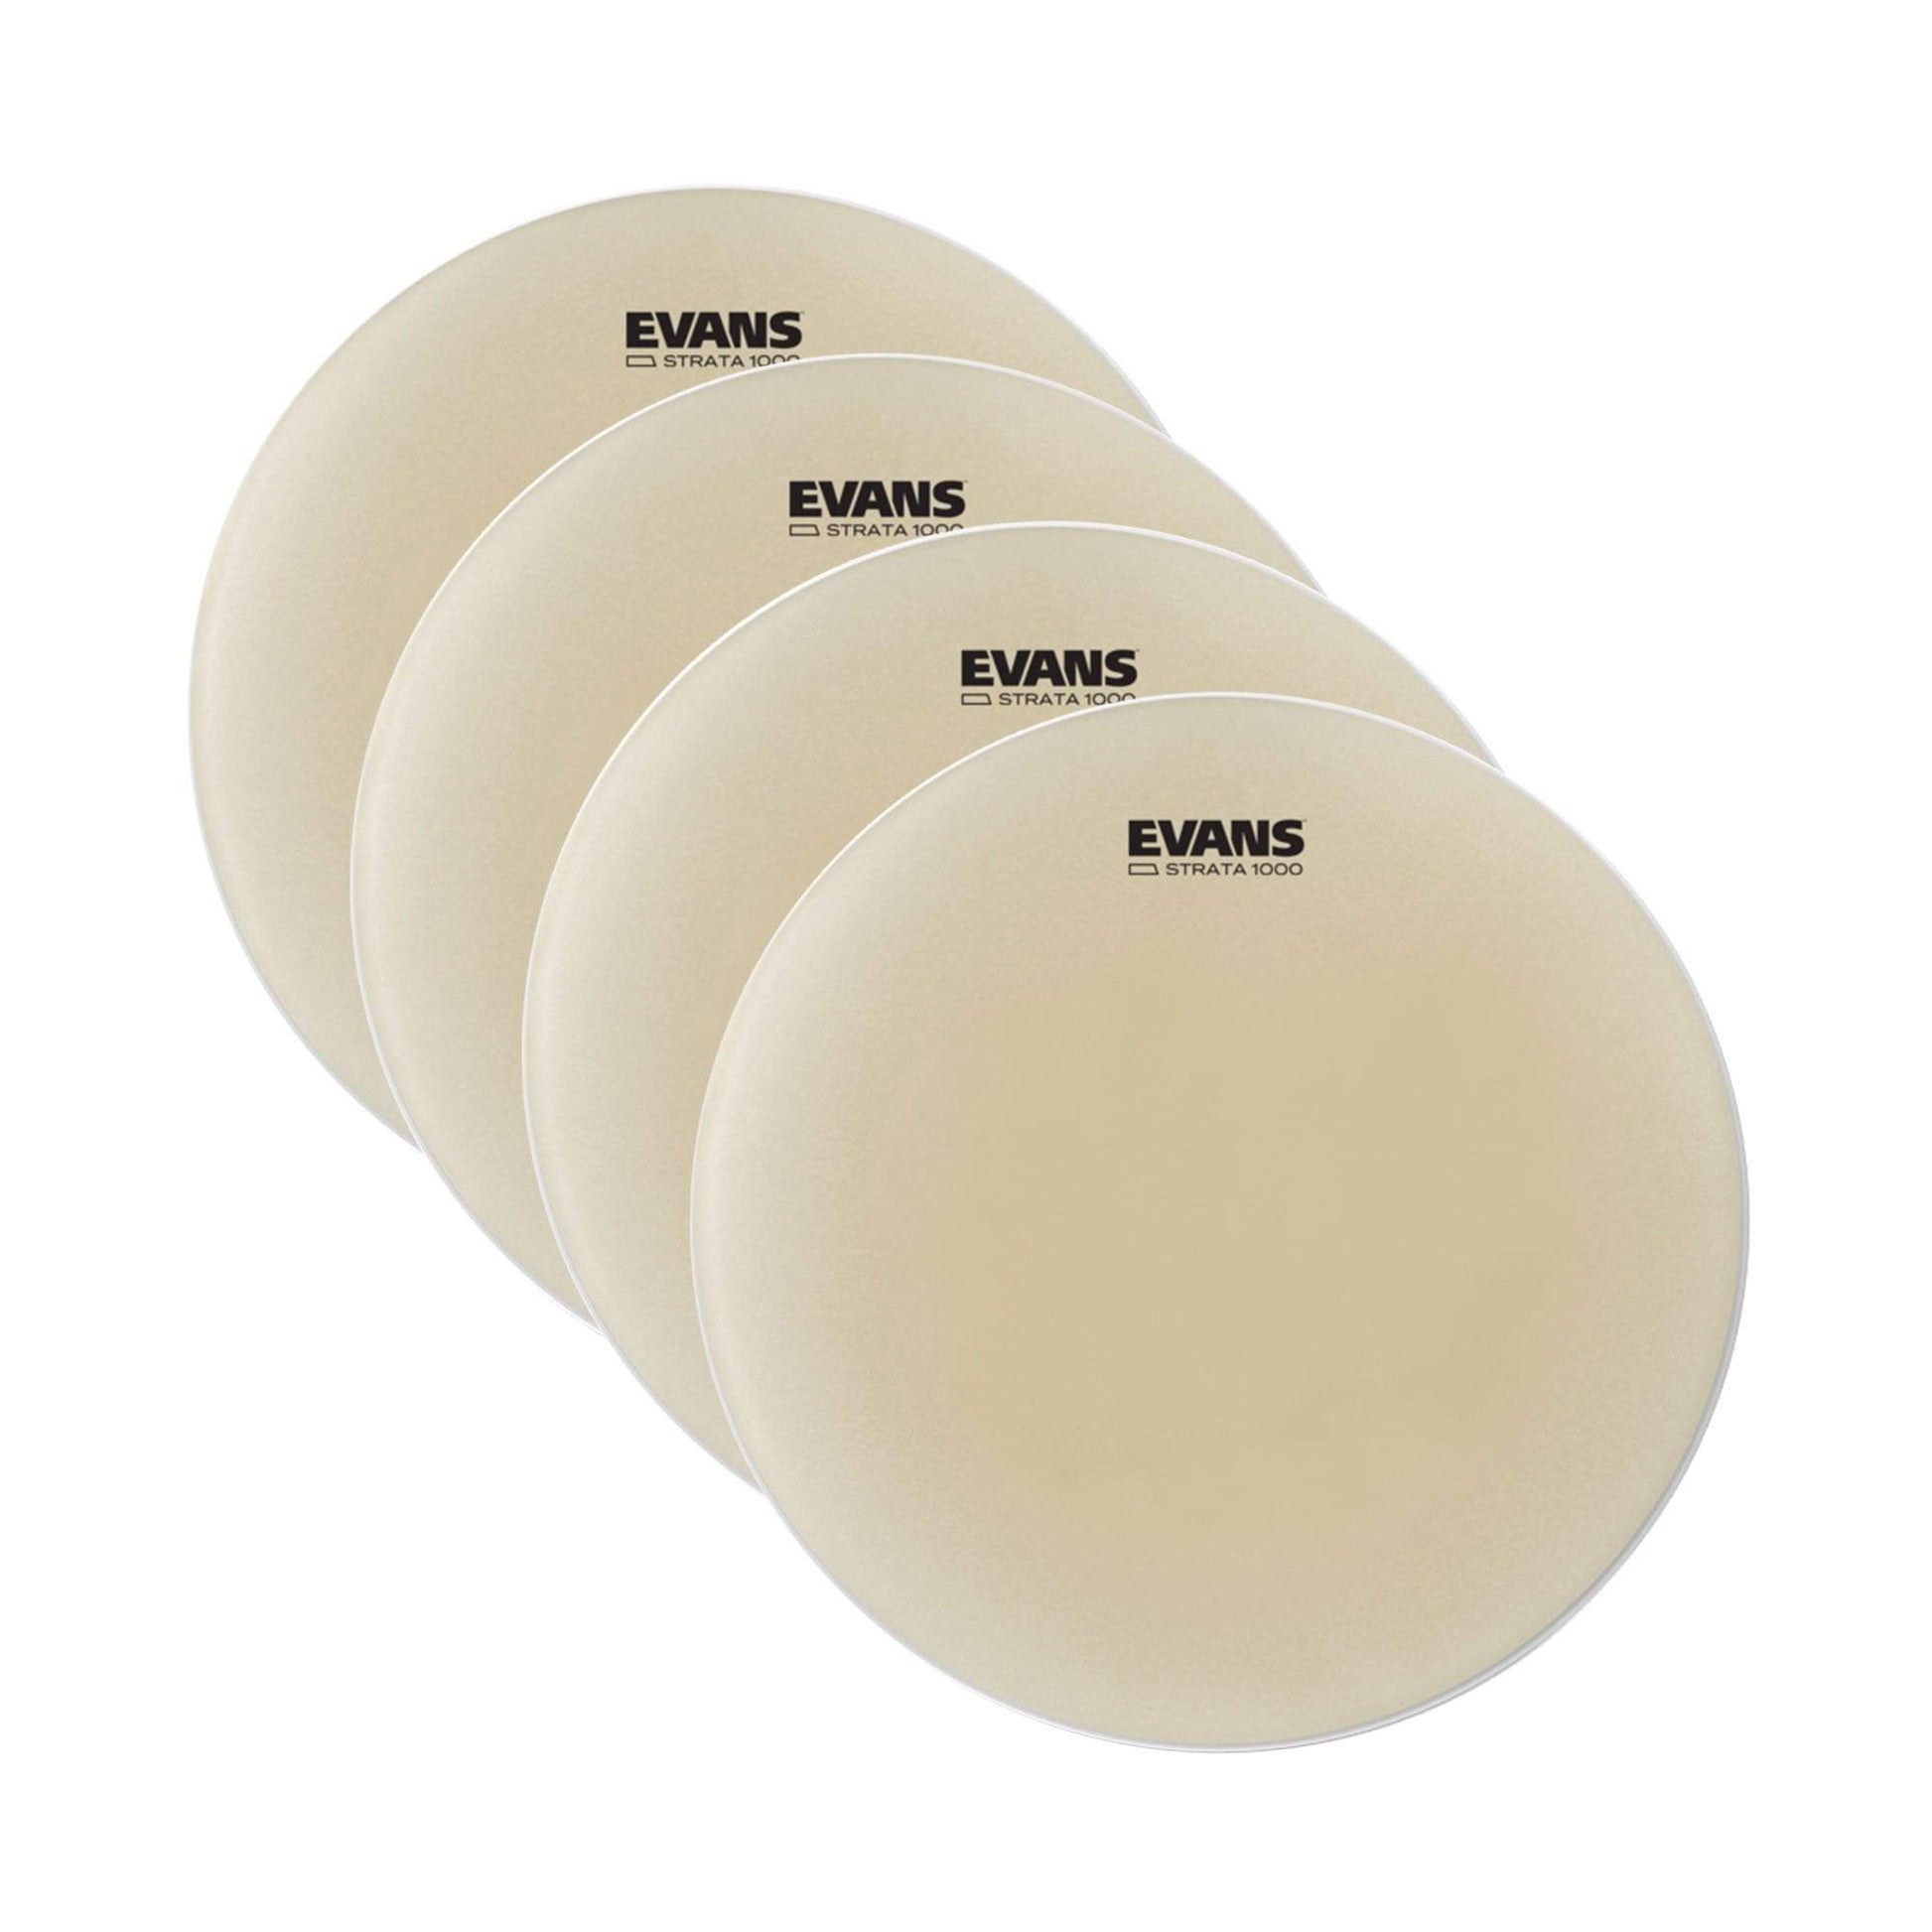 Evans 14" Strata 1000 Drum Head (4 Pack Bundle) Drums and Percussion / Parts and Accessories / Heads